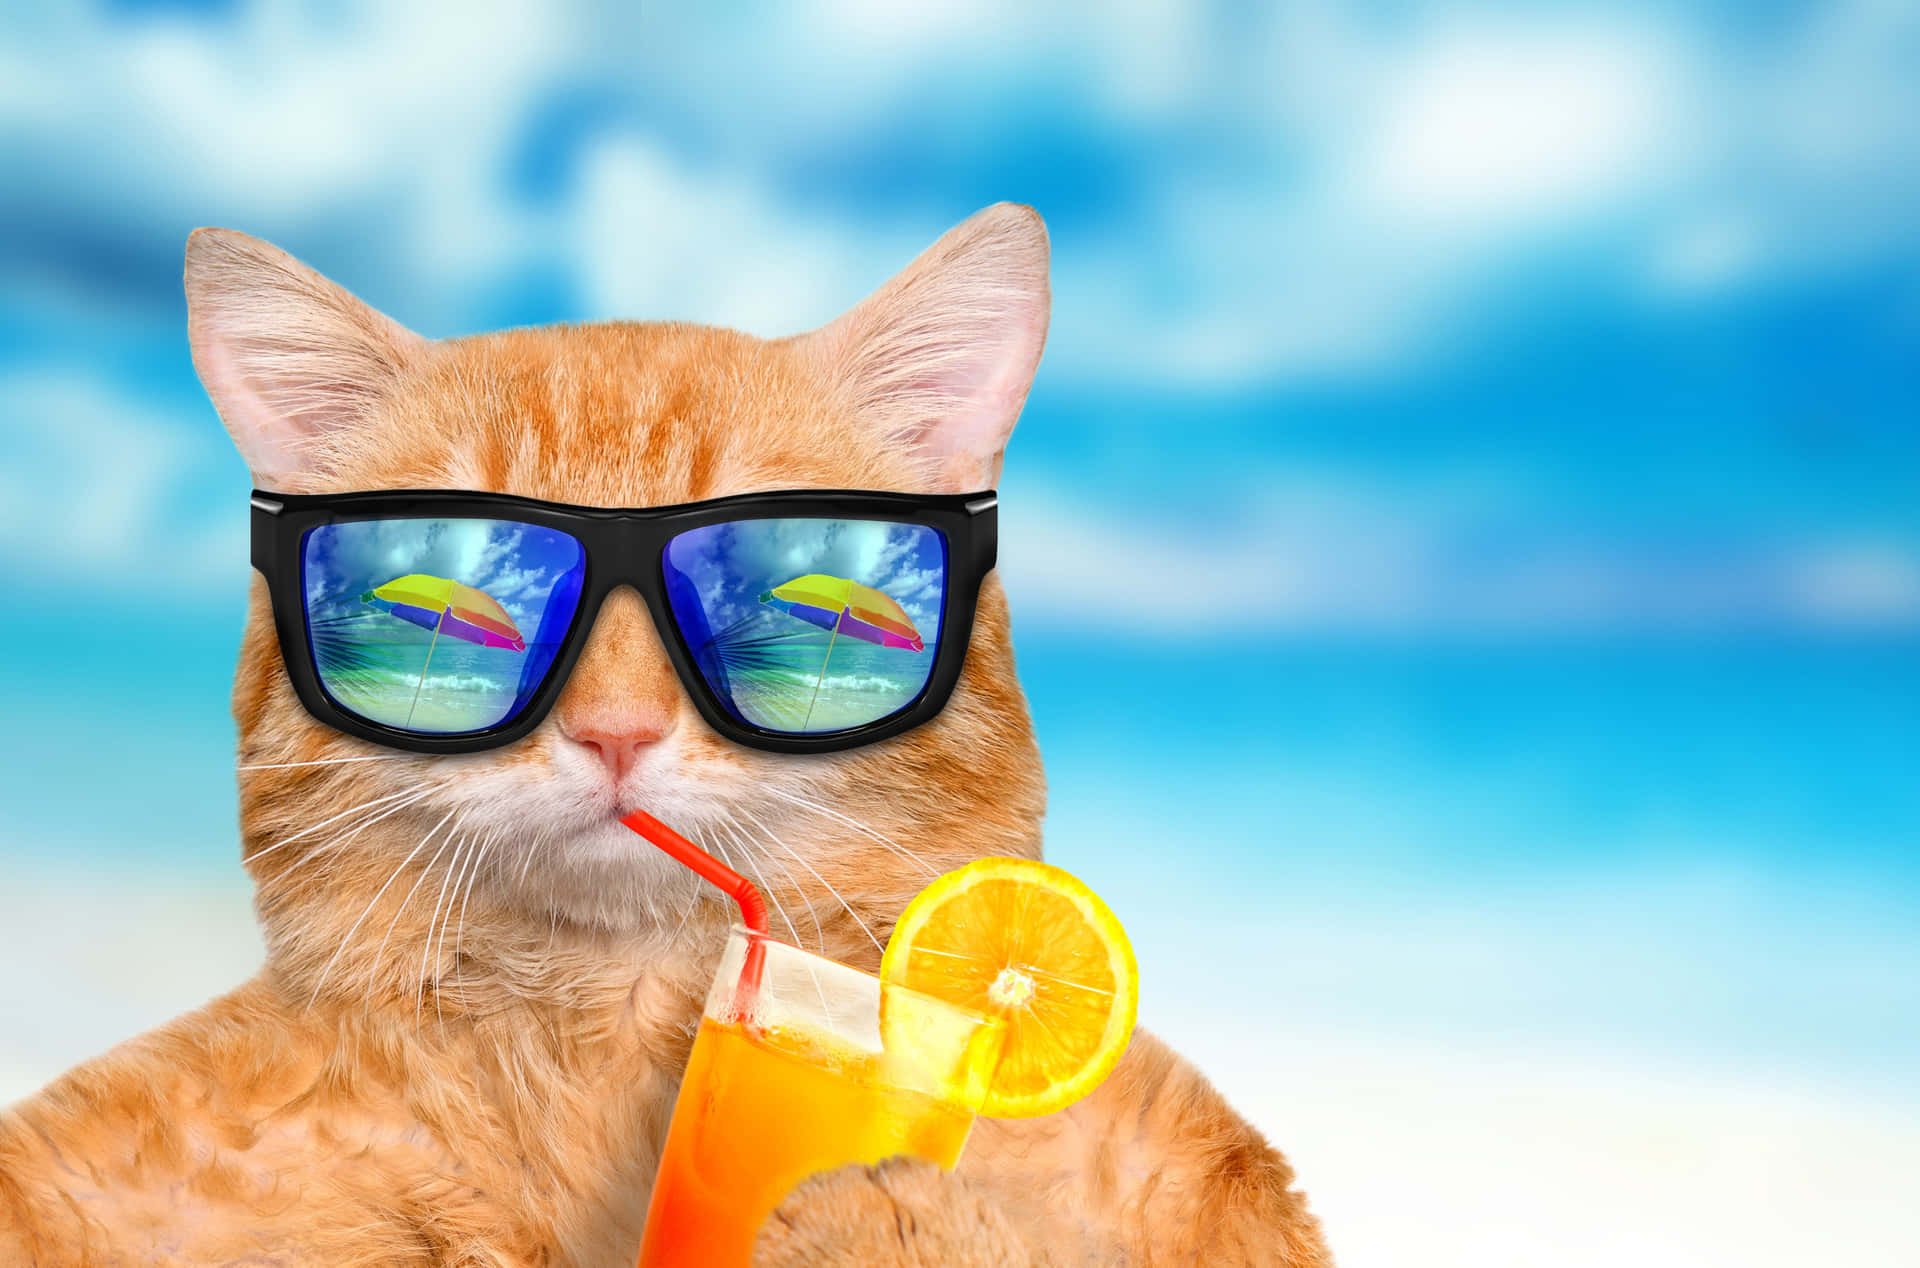 "Take a moment to relax and enjoy the beautiful summer weather with a cute desktop wallpaper." Wallpaper